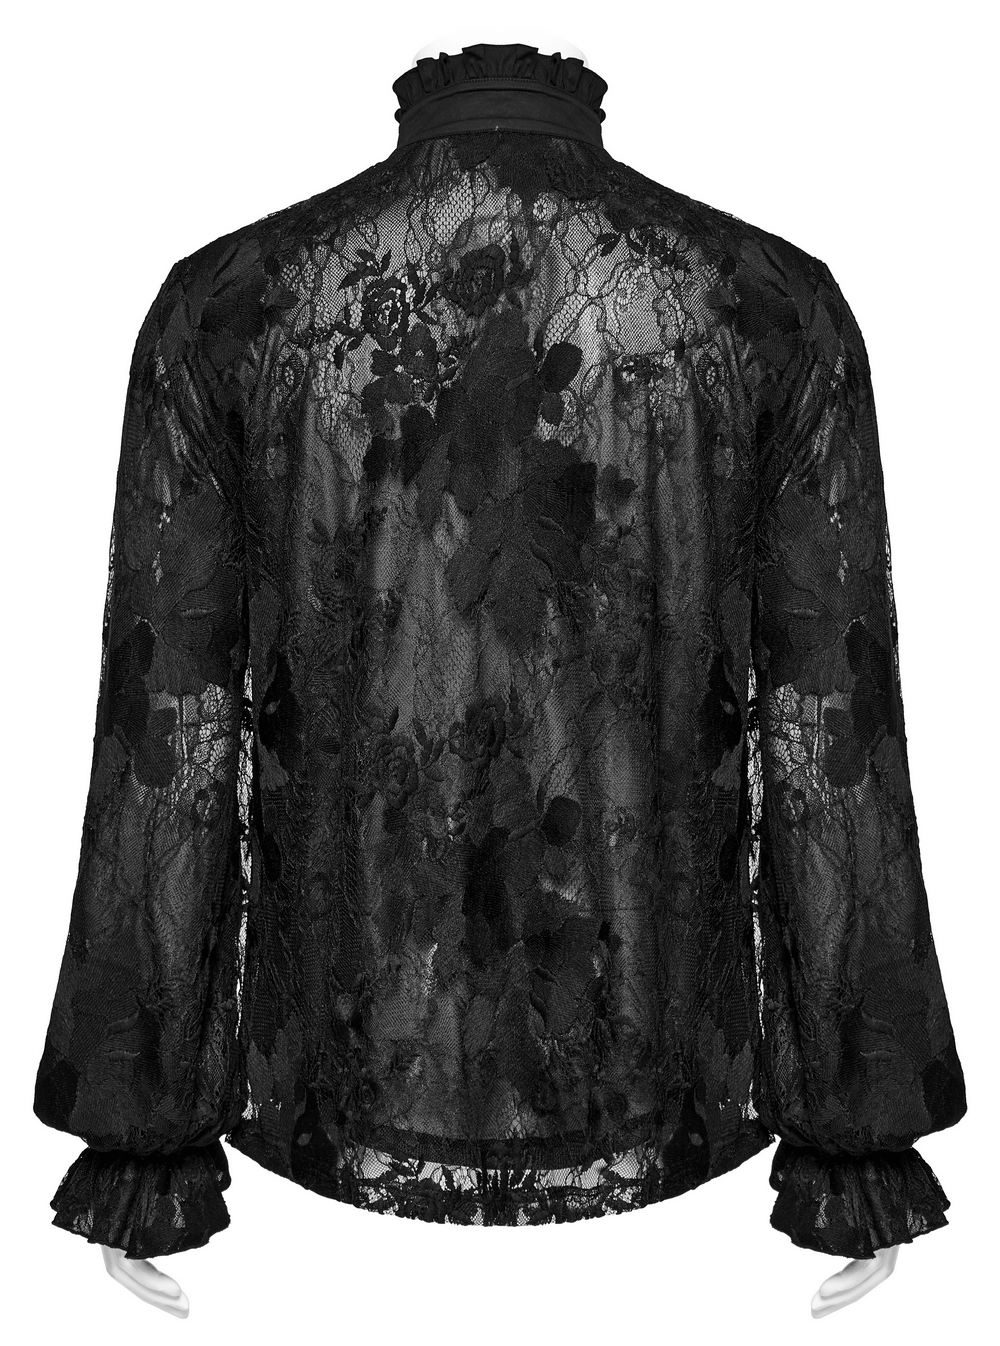 Black Lace Embroidered Gothic Shirt with Ruffled Collar